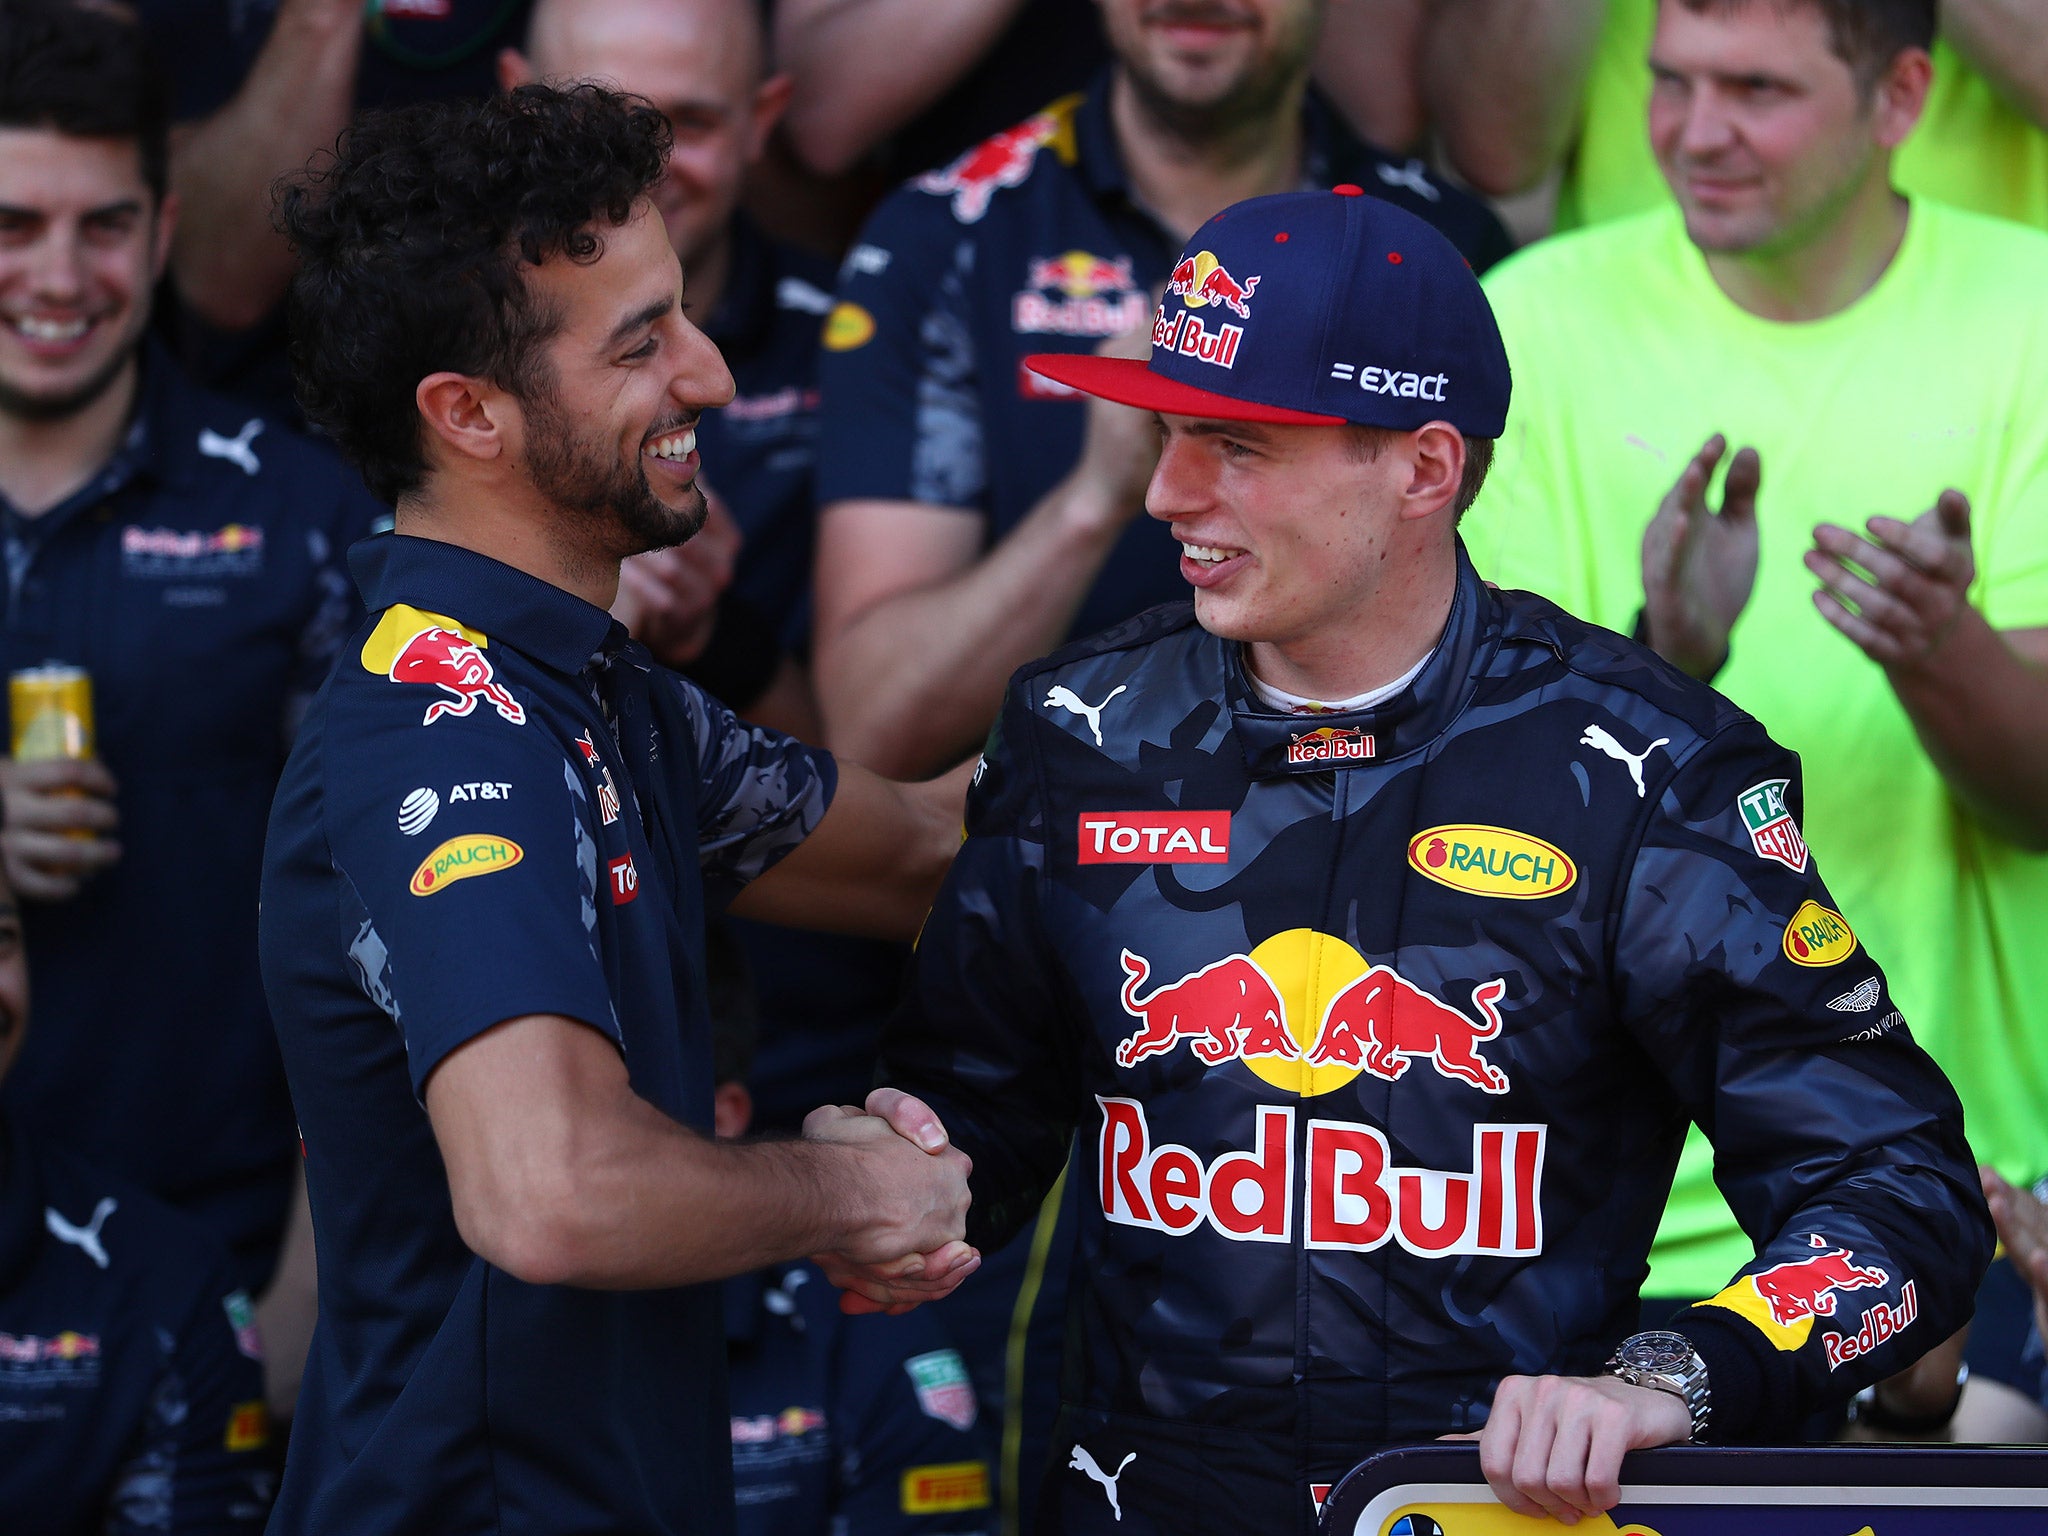 Ricciardo was happy for Verstappen despite missing out on the podium